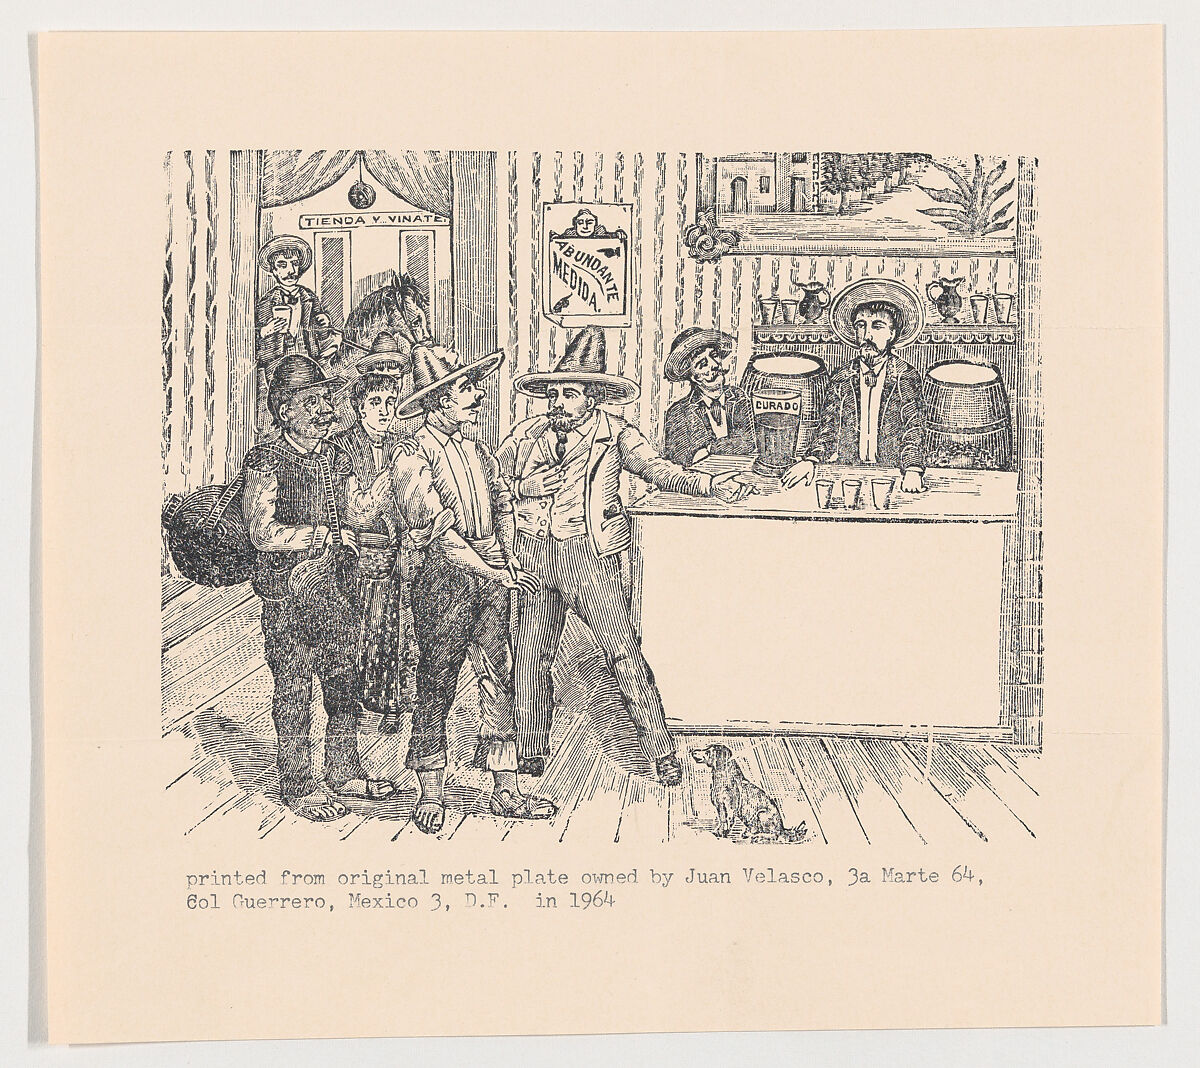 Men  in a tavern standing around a bar, ? José Guadalupe Posada (Mexican, Aguascalientes 1852–1913 Mexico City), Type-metal engraving 